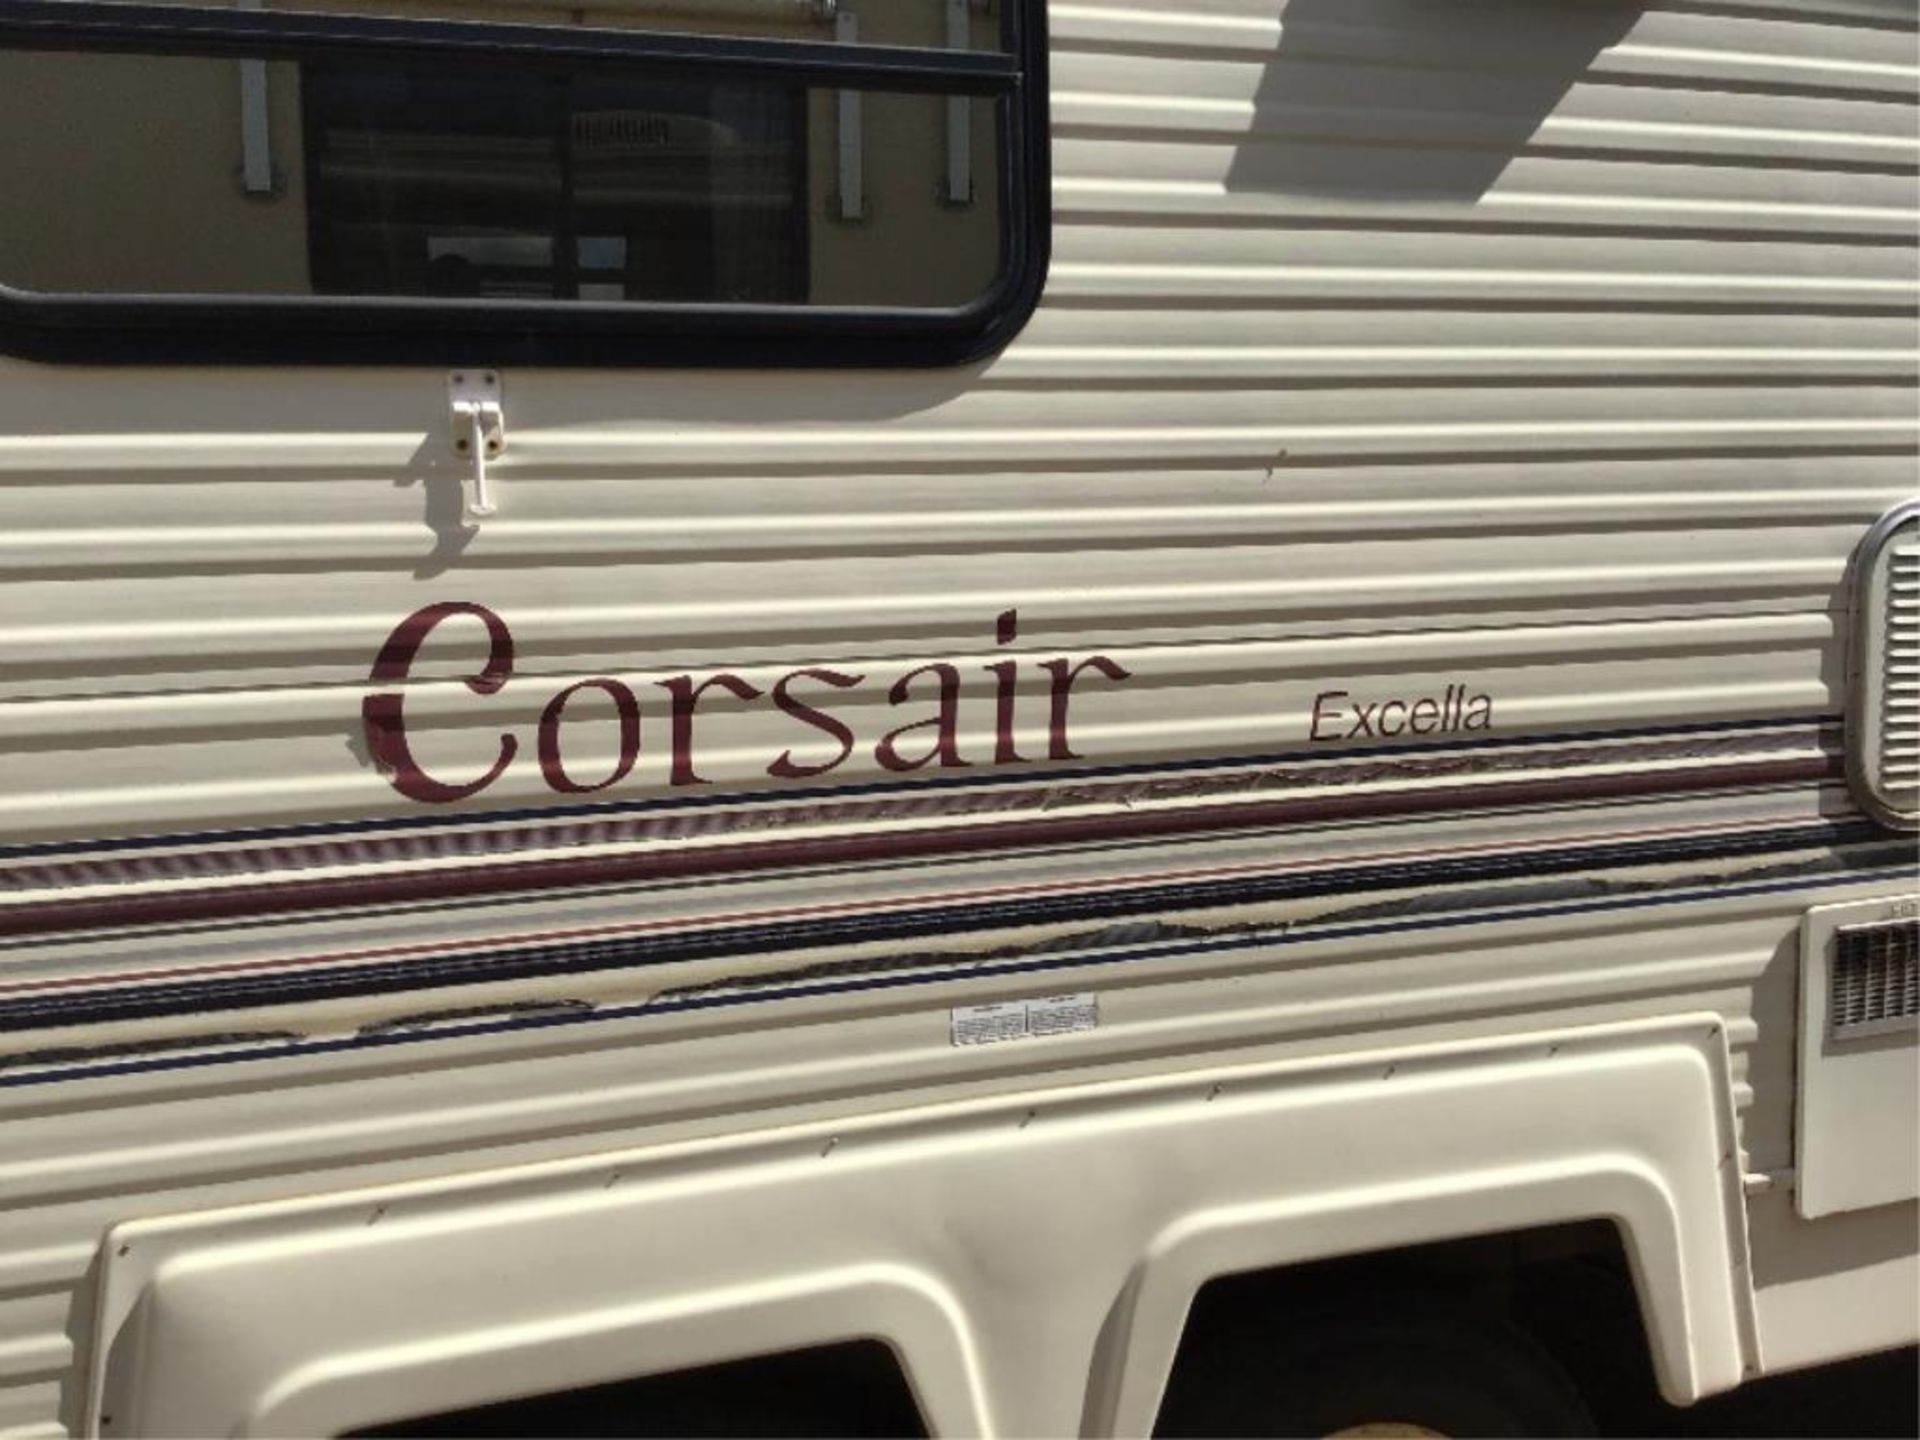 1993 Corsairs Excella 5th Wheel Holiday Trailer - Image 3 of 14